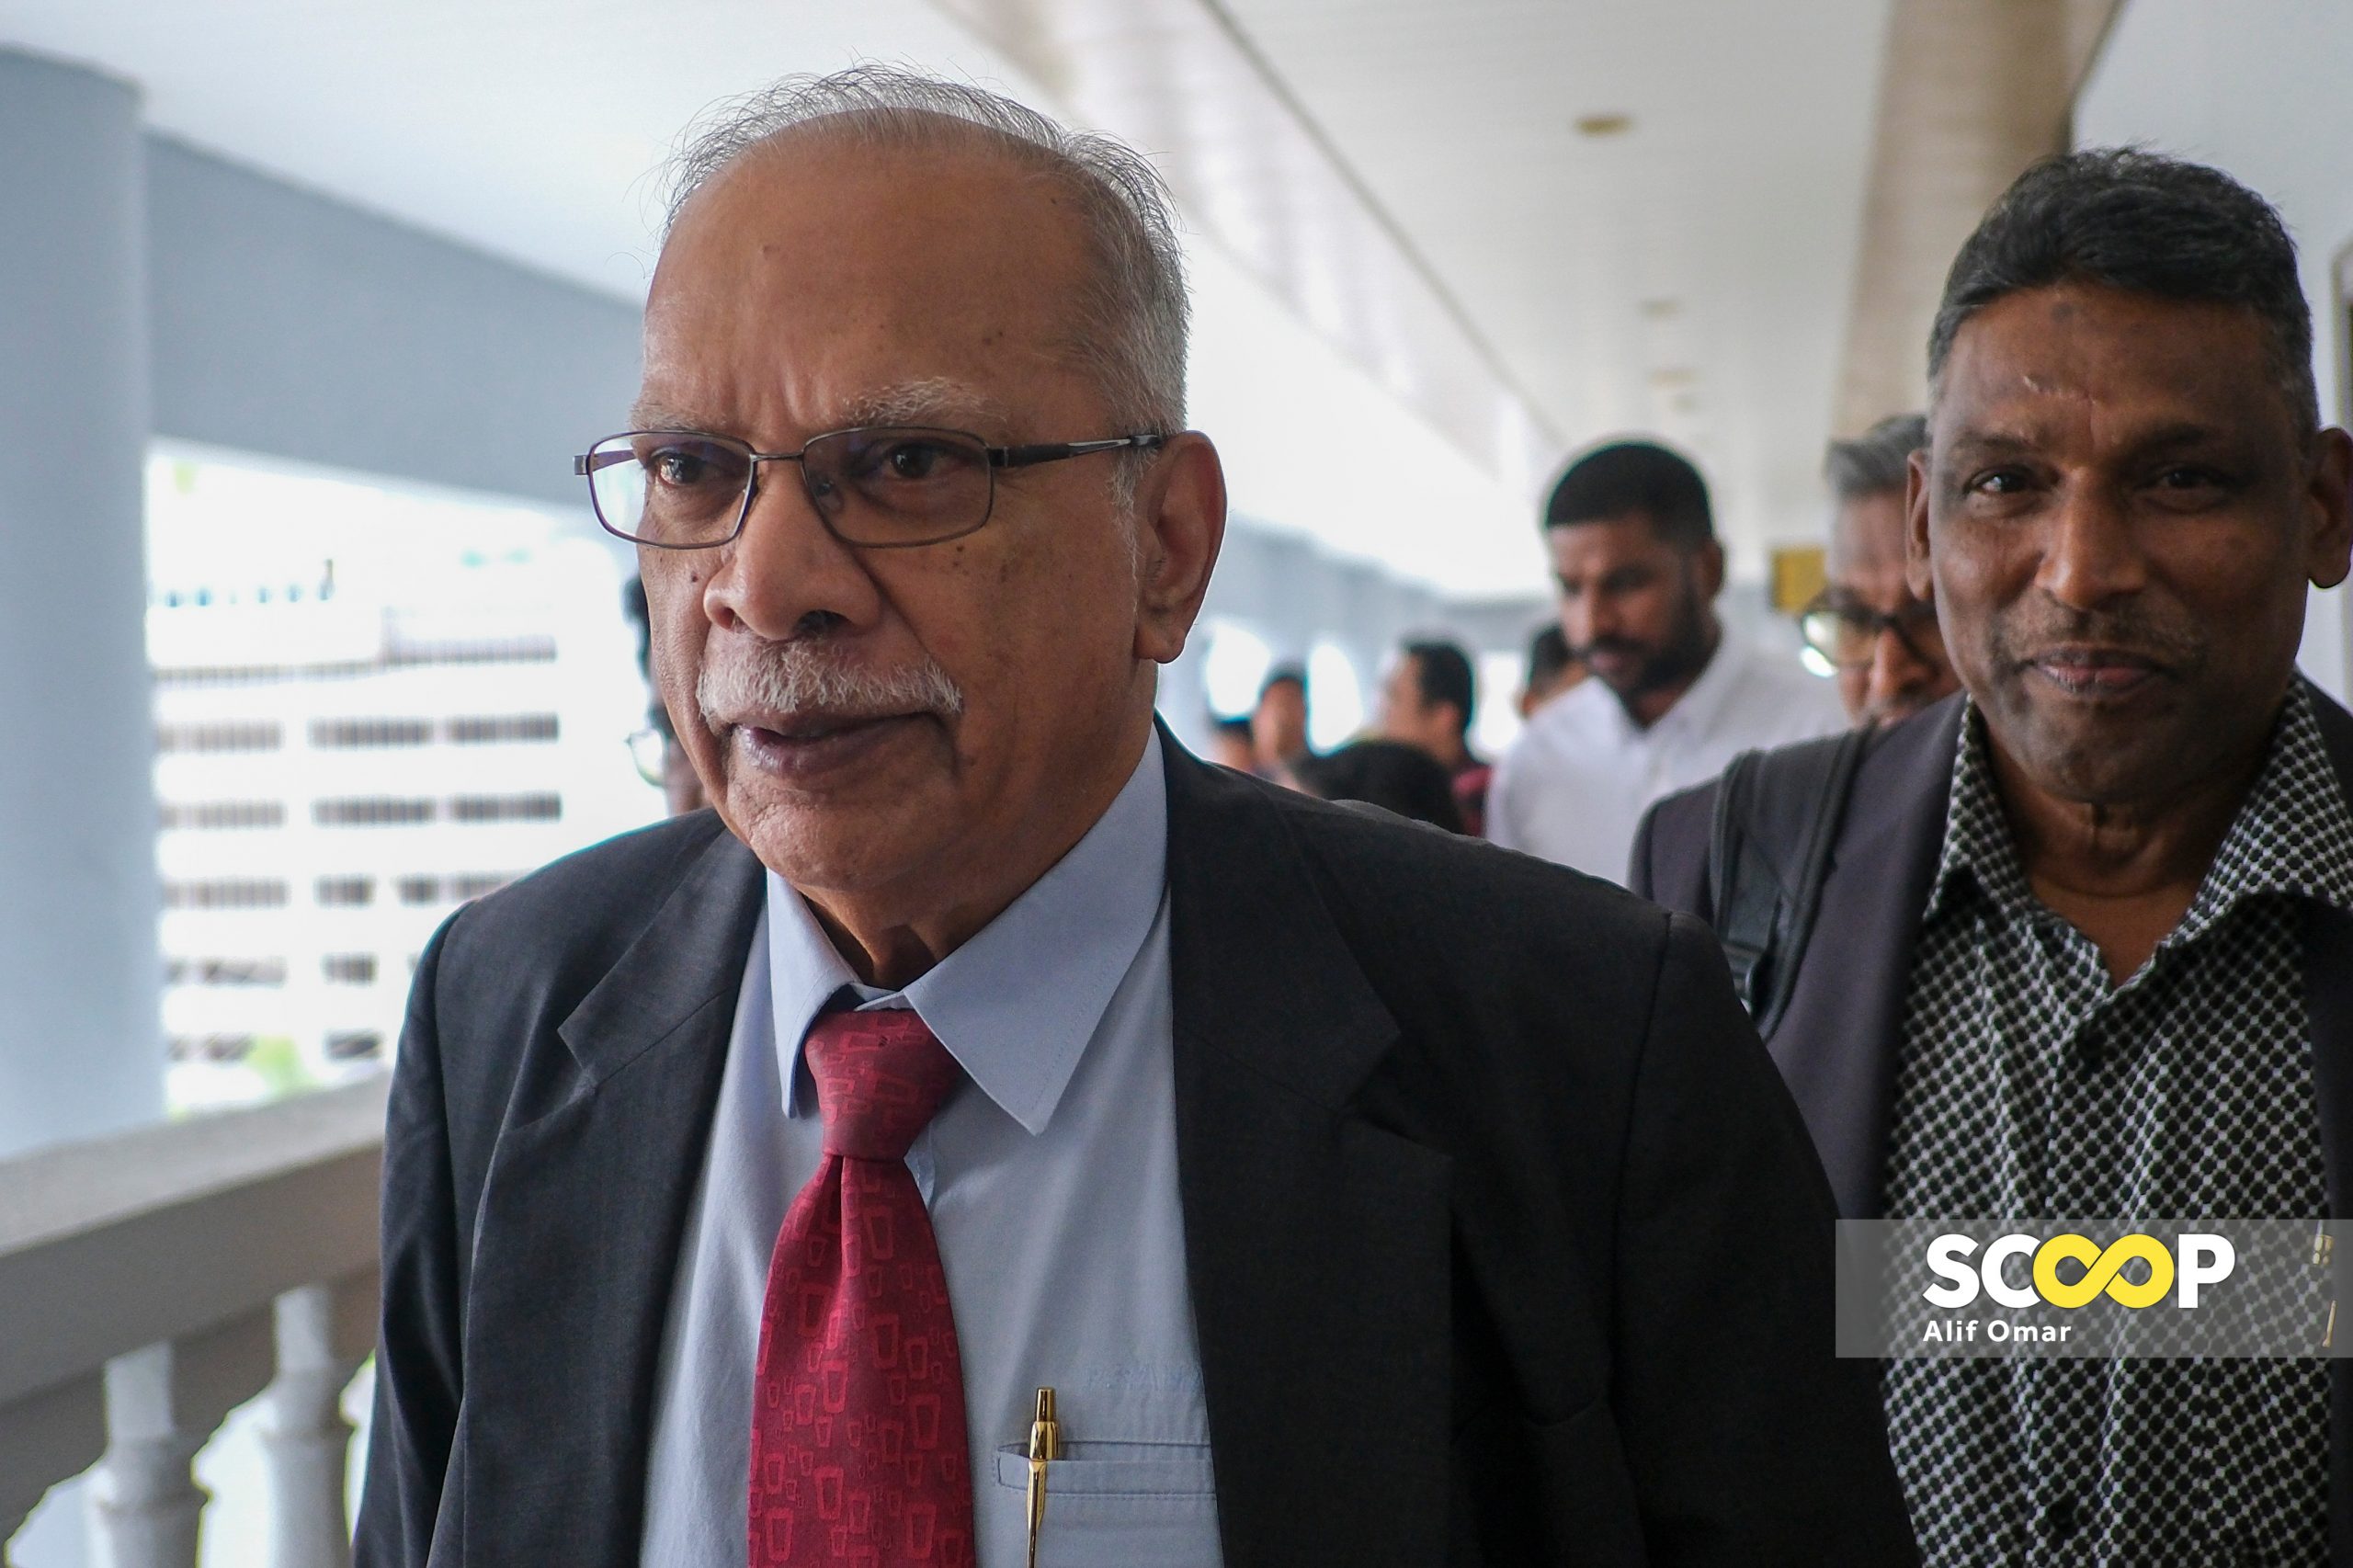 Courts orders Ramasamy to pay Zakir Naik RM1.52 mil for defamation